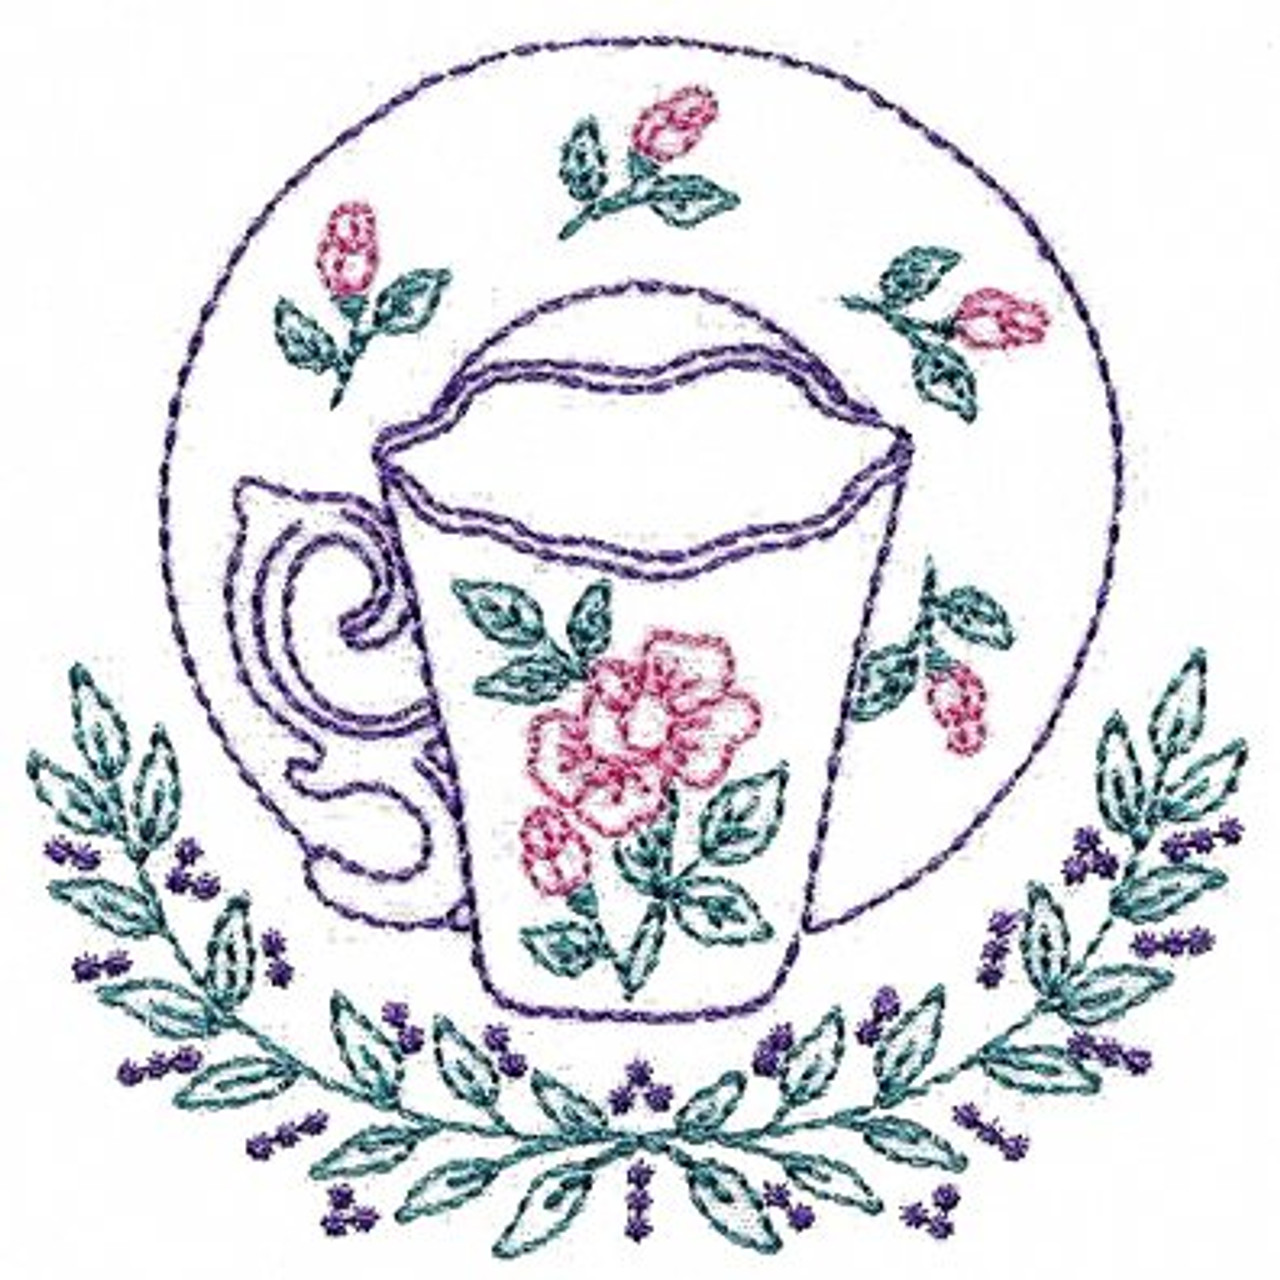 Aunt Martha's®, Hand Embroidery, Transfer Pattern, 3682, Animals & Flo –  The Vintage Teacup